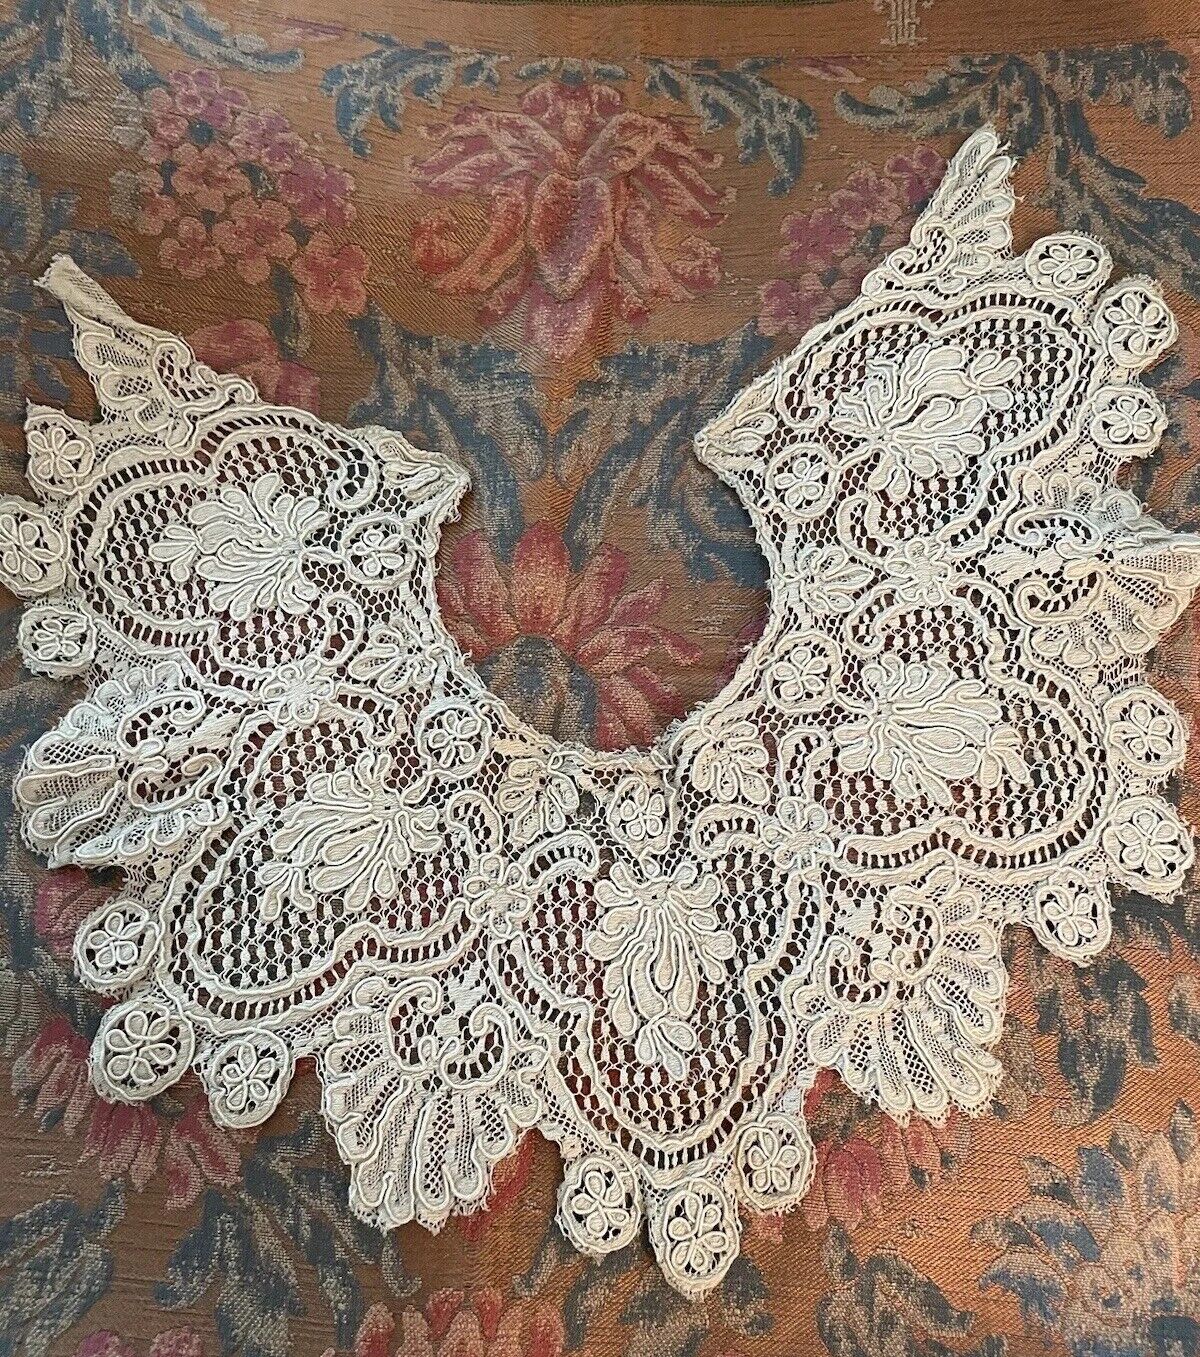 C. 1800s French Antique Fine Lace Ruff Collar Jabot, Magnificent